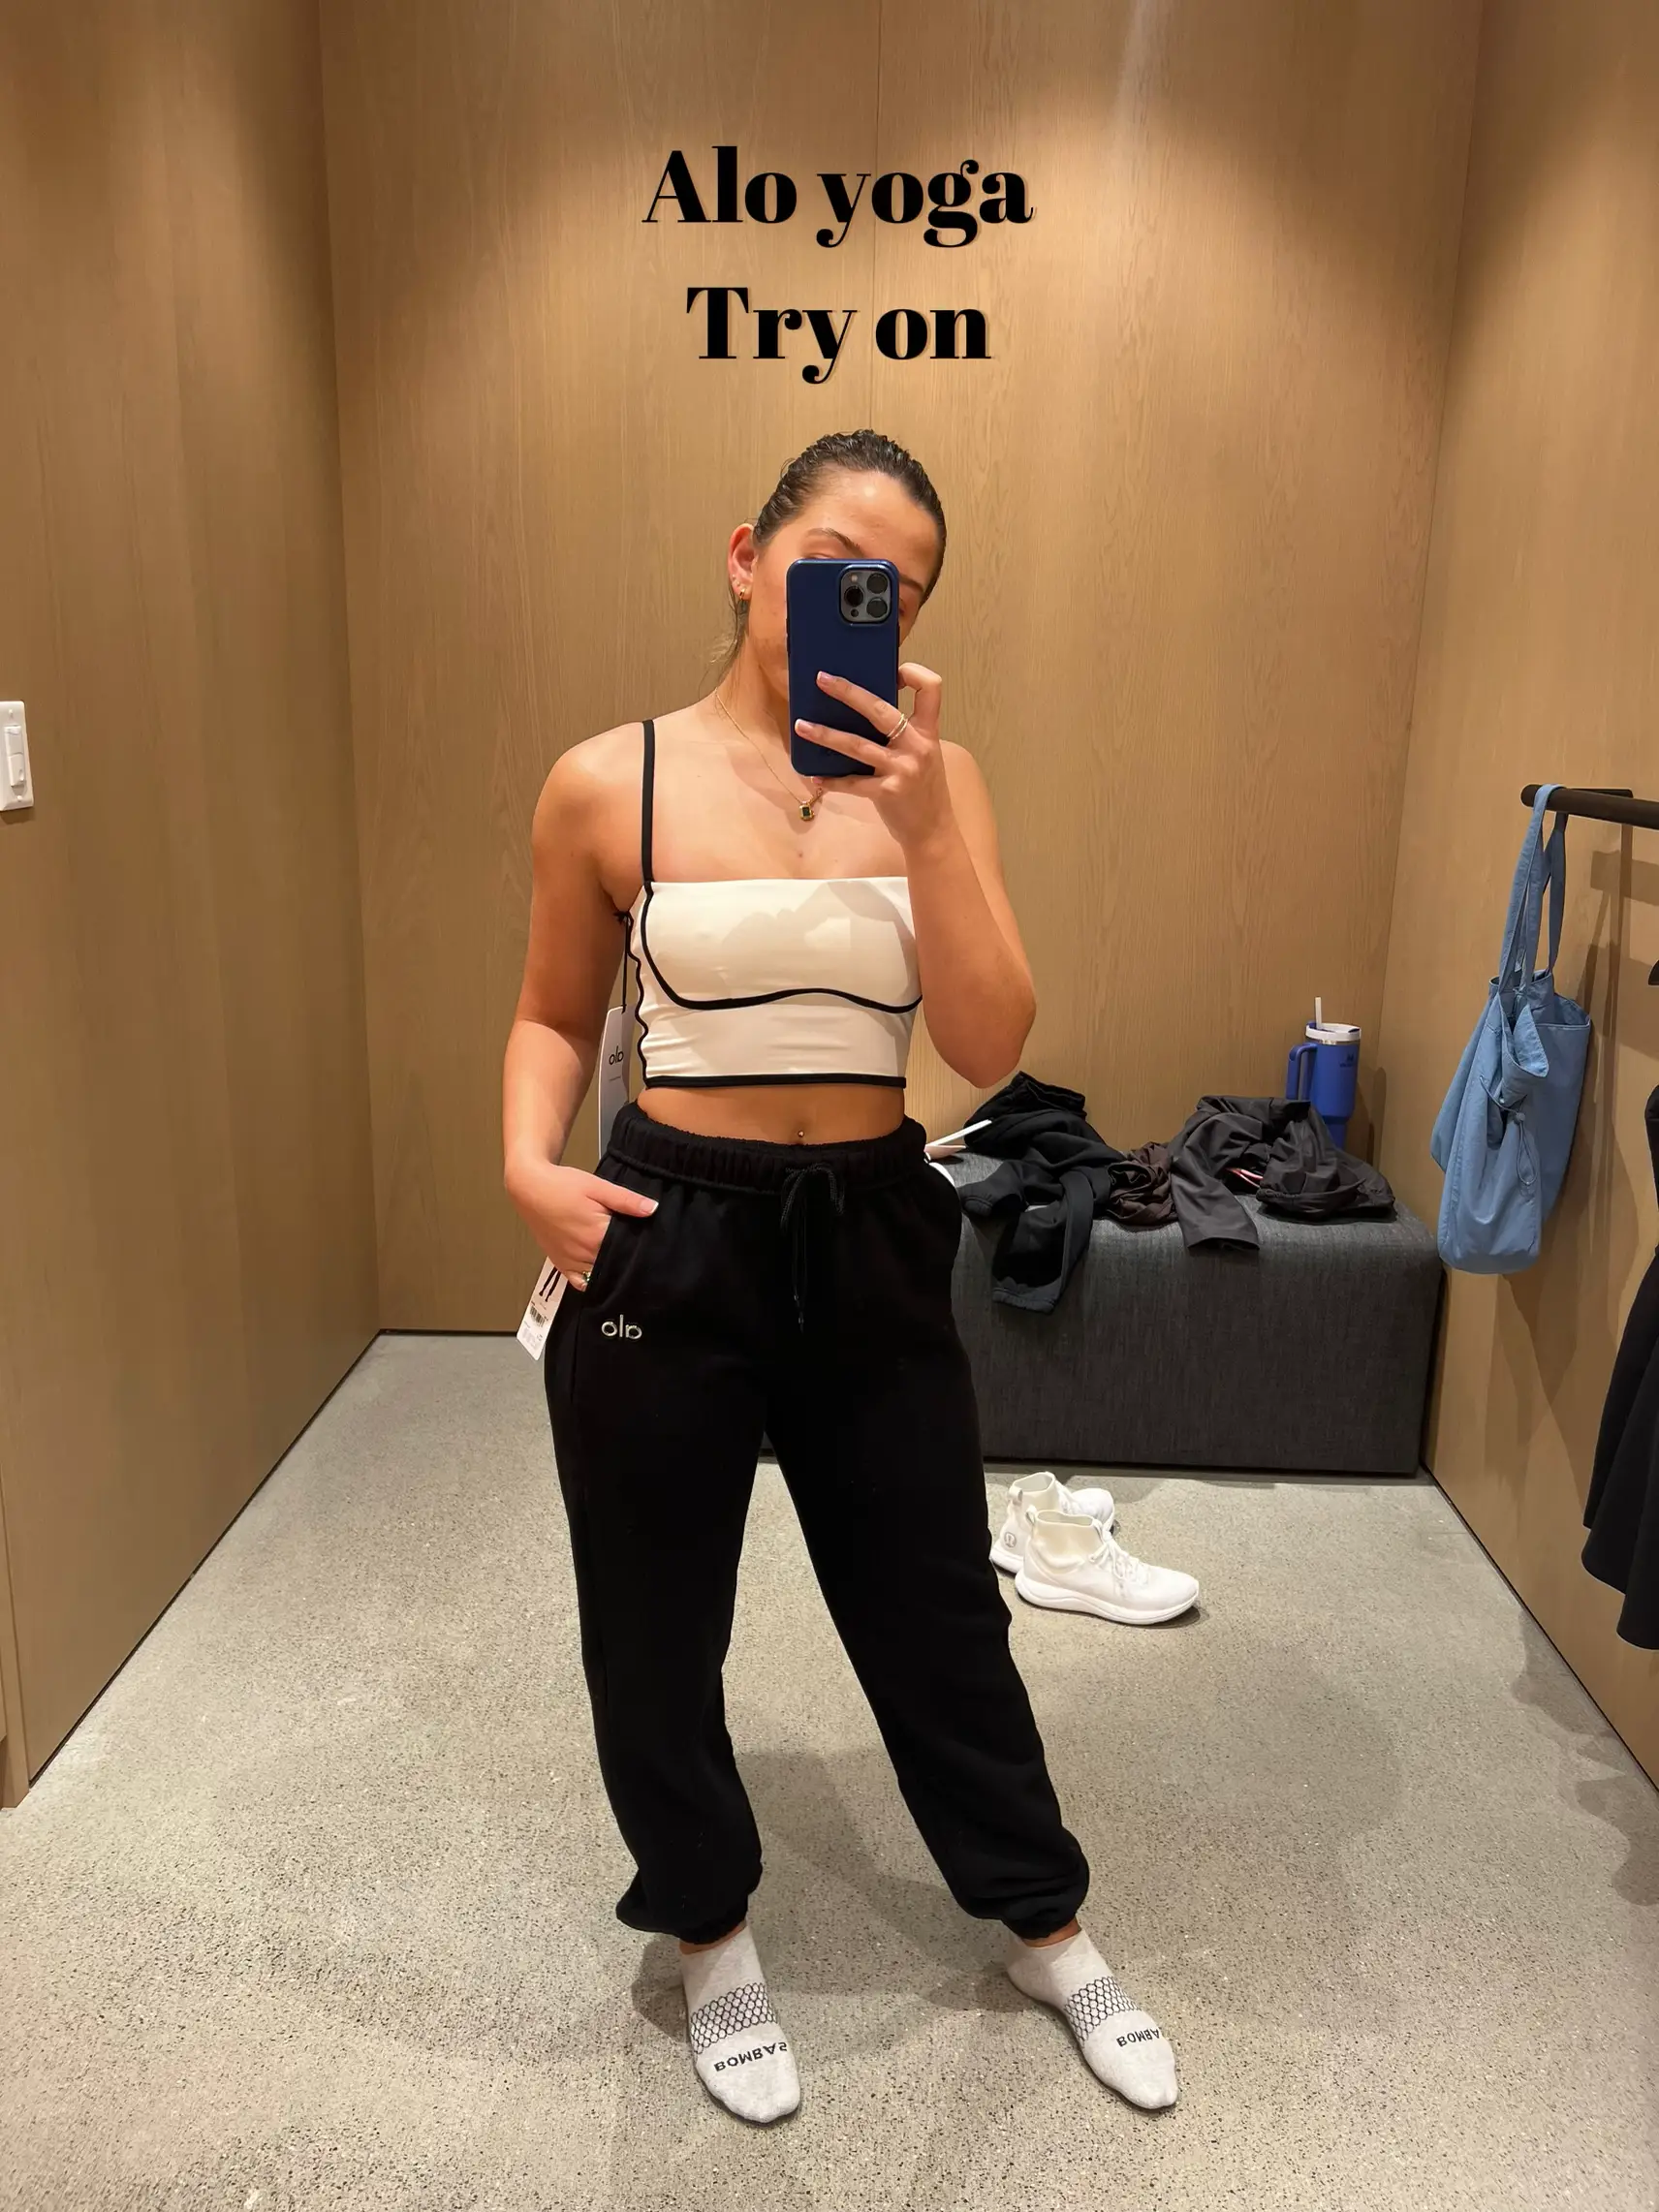 ALO YOGA TRY ON HAUL & REVIEW